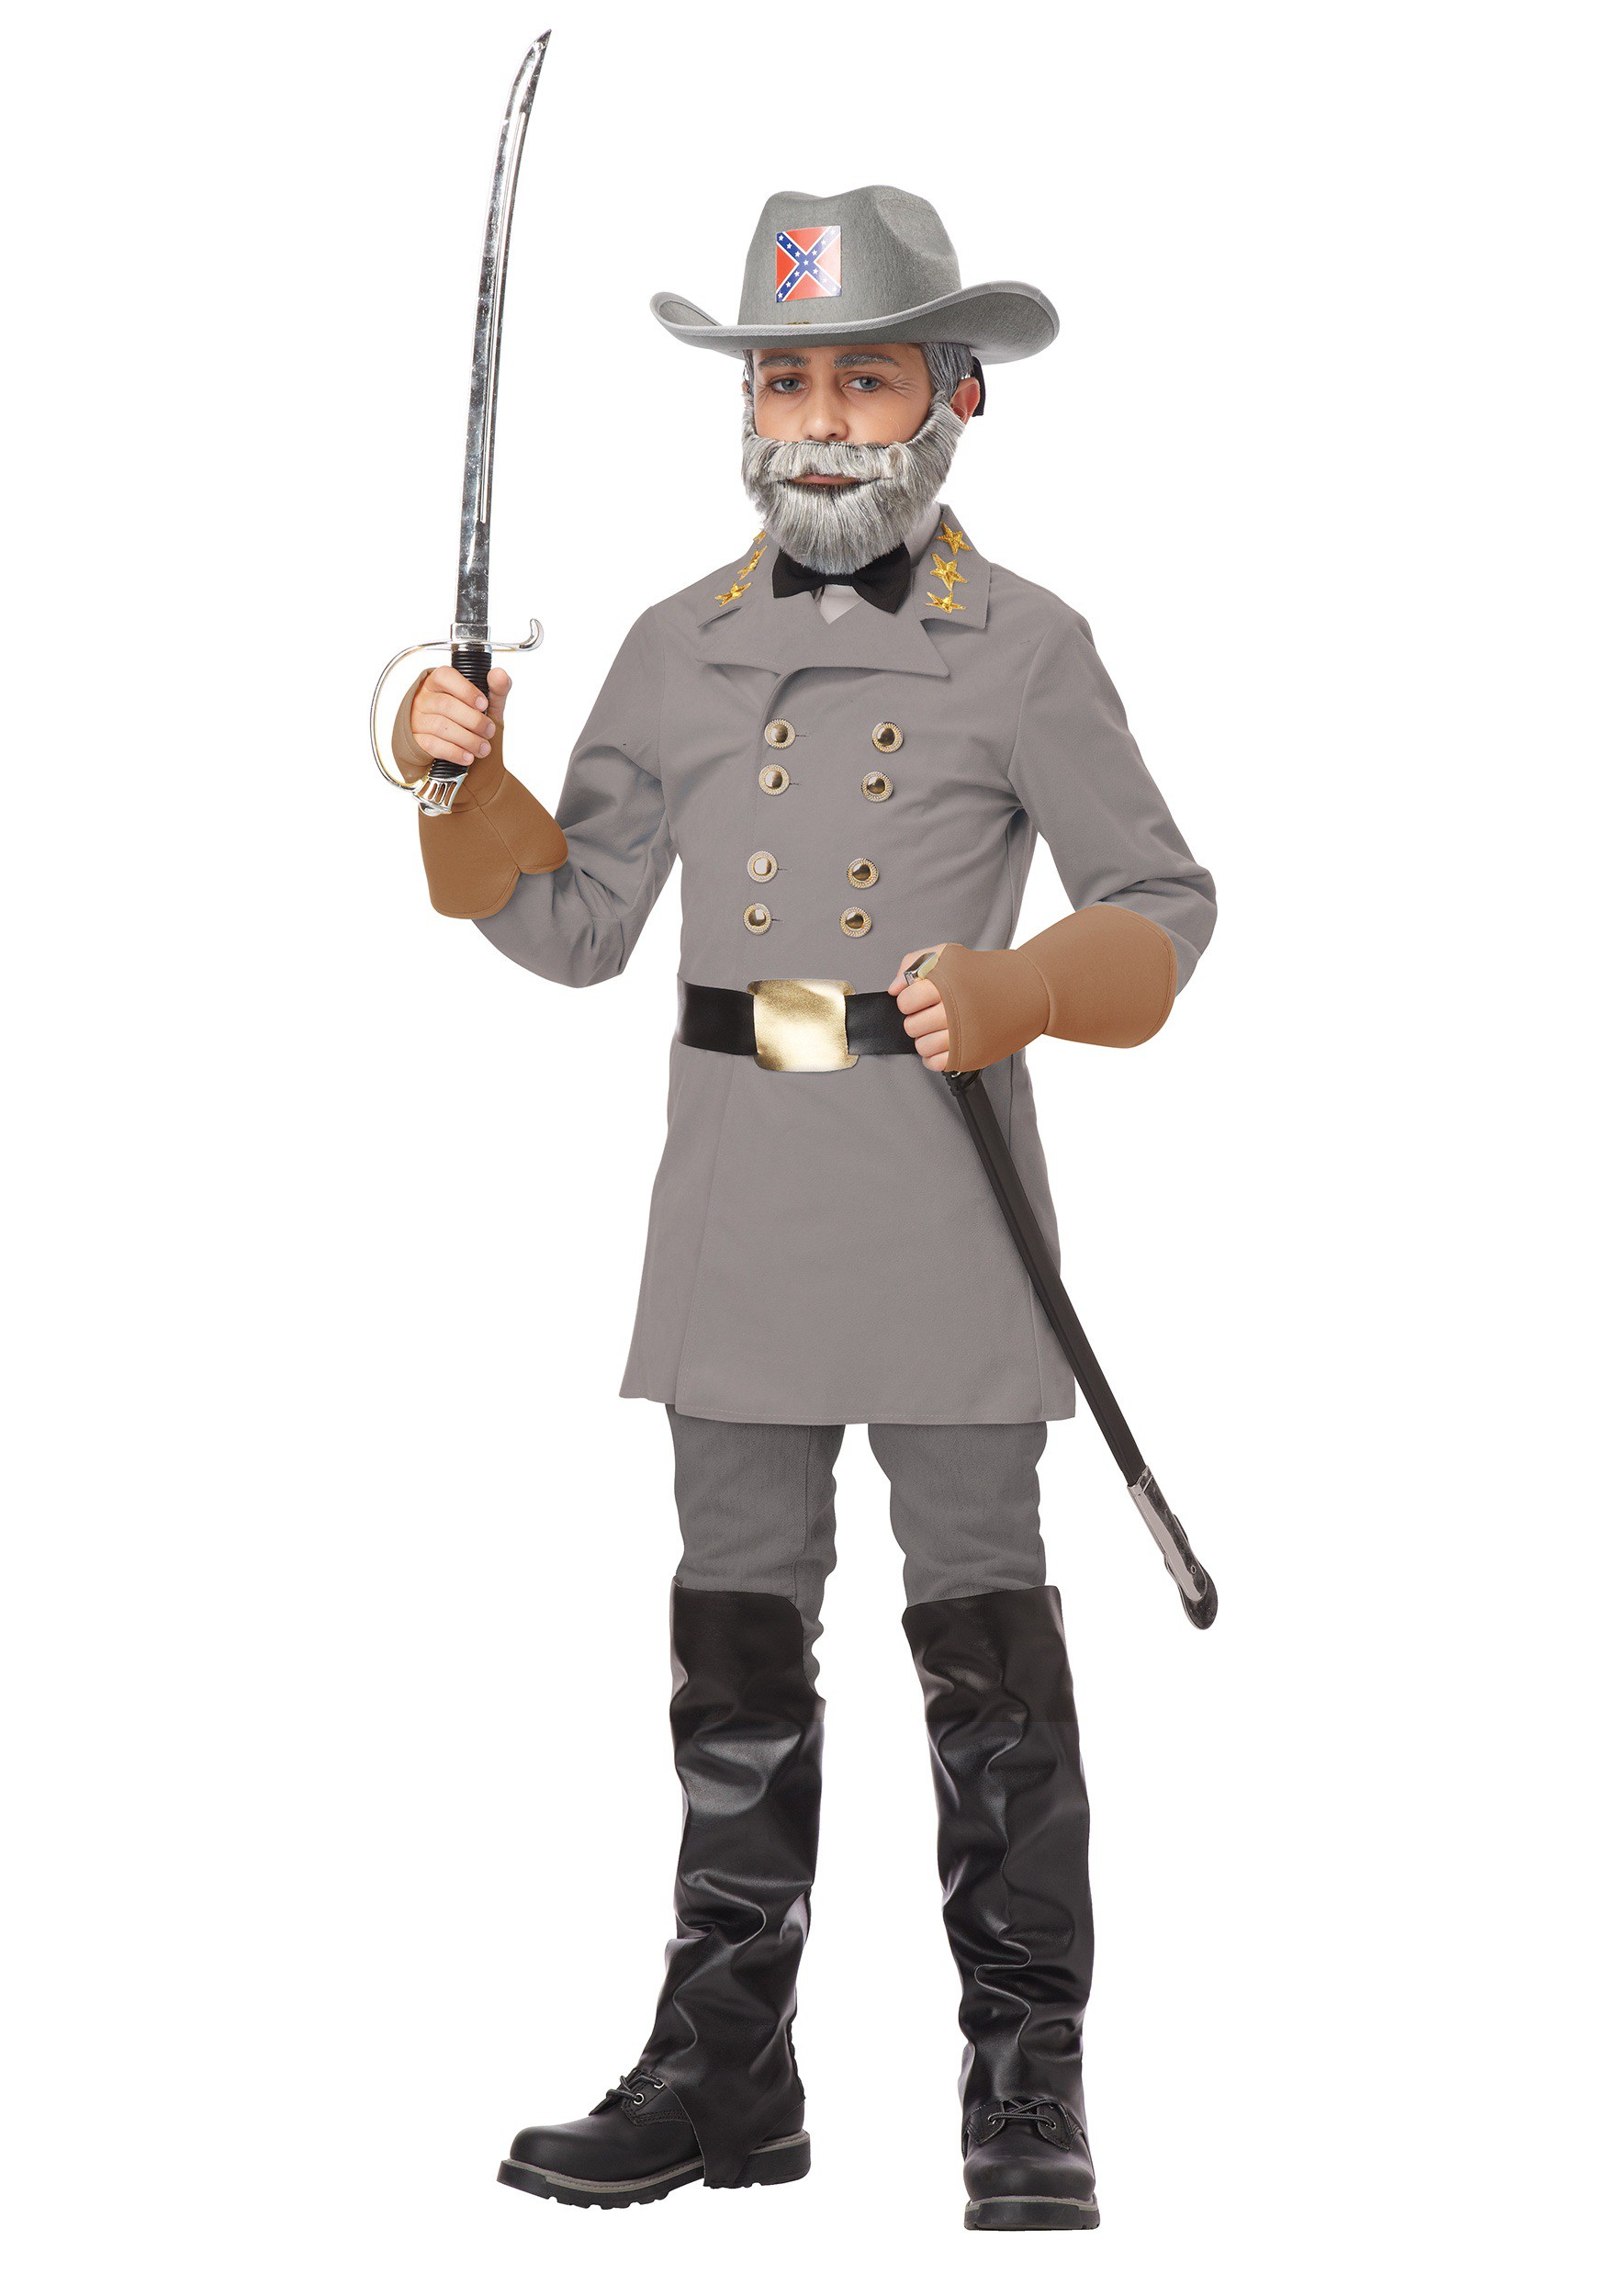 Robert E. Lee - Because little Tommy wore the Klan outfit last year.